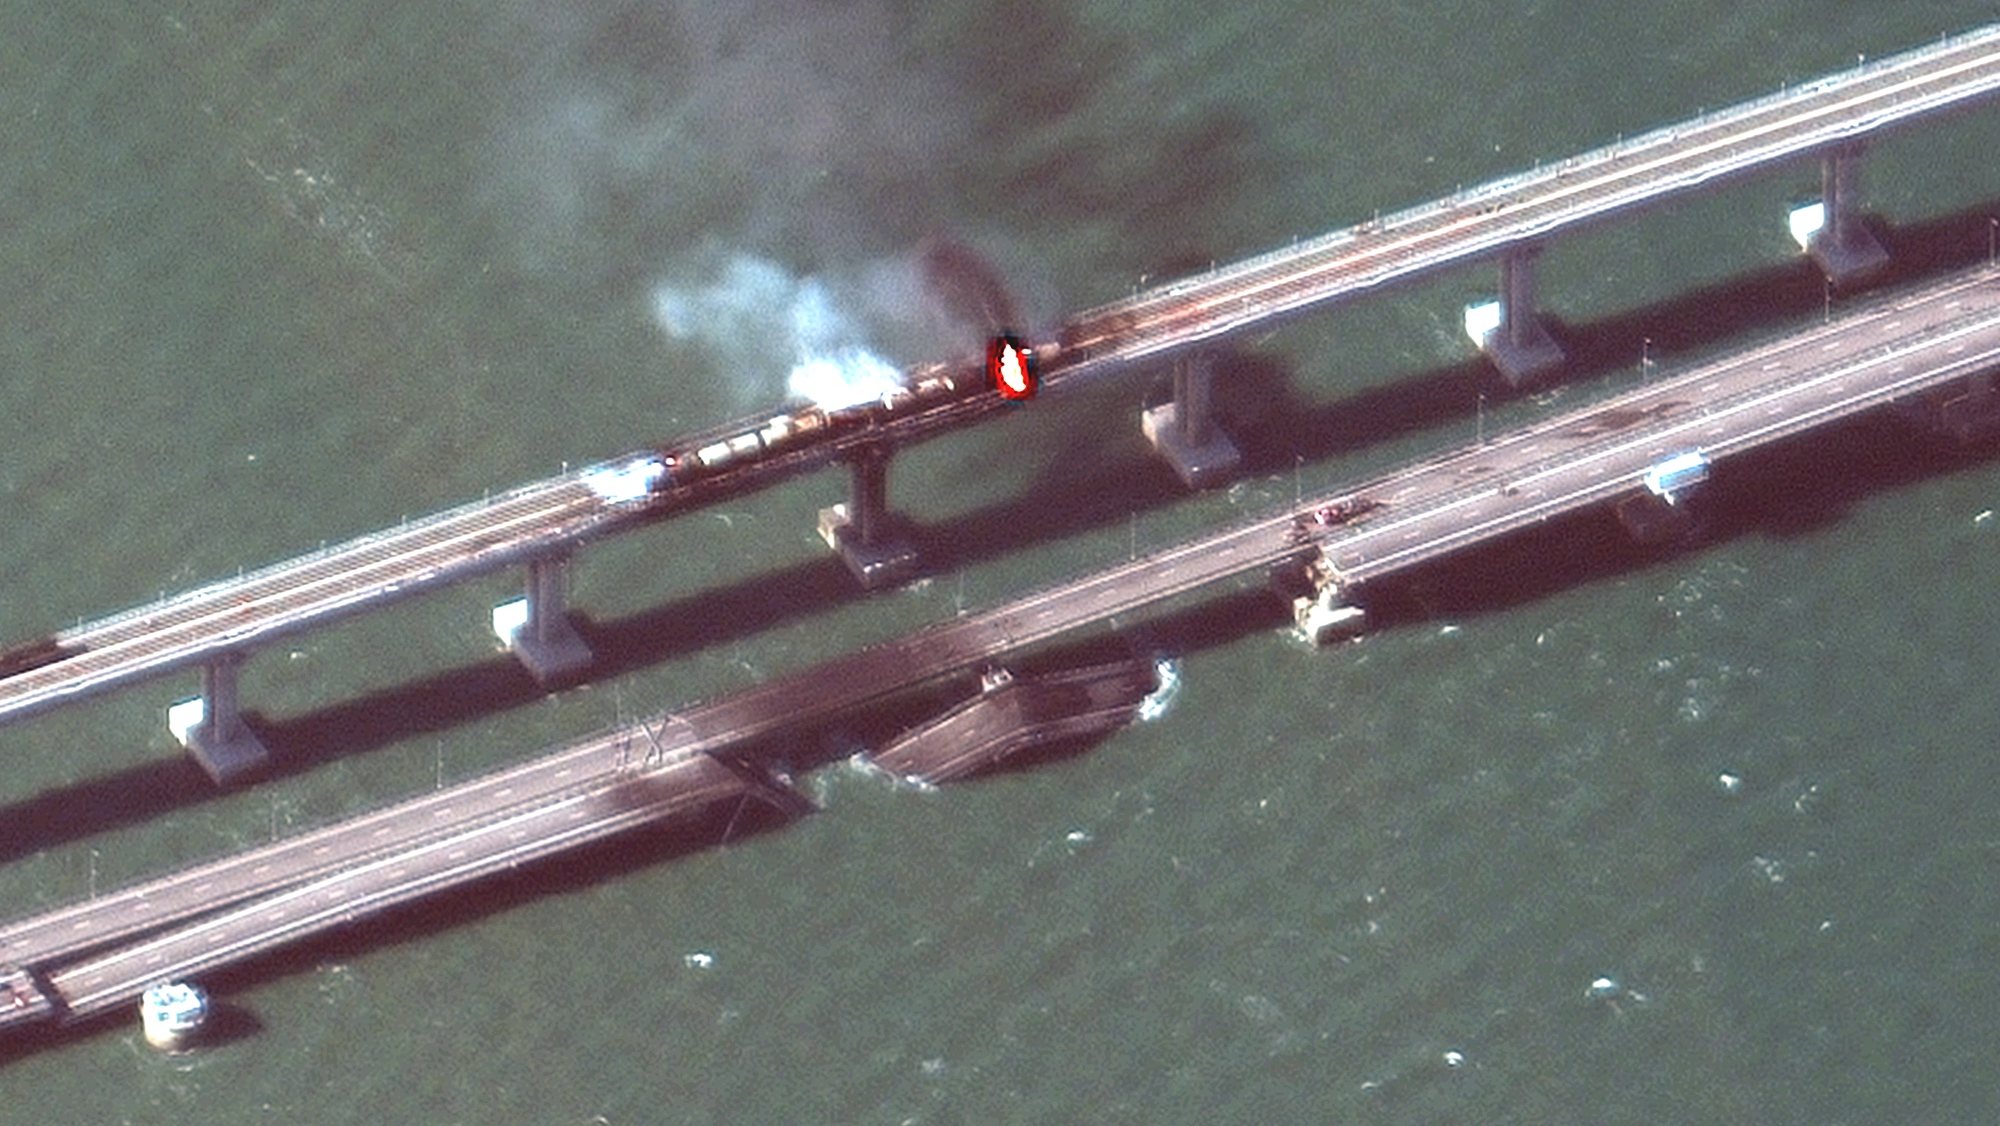 epa10231797 A handout satellite image made available by Maxar Technologies shows smoke and a collapsed part of the Kerch Strait bridge in Crimea, 08 October 2022. According to Russian authorities, &#039;an explosion was set off at a cargo vehicle on the motorway part of the Crimean bridge on the side of the Taman peninsula, which set fire to seven fuel tanks of a train that was en route to the Crimean peninsula. Two motorway sections of the bridge partially collapsed.&#039;  EPA/MAXAR TECHNOLOGIES HANDOUT -- MANDATORY CREDIT: SATELLITE IMAGE 2022 MAXAR TECHNOLOGIES -- THE WATERMARK MAY NOT BE REMOVED/CROPPED -- HANDOUT EDITORIAL USE ONLY/NO SALES HANDOUT EDITORIAL USE ONLY/NO SALES HANDOUT EDITORIAL USE ONLY/NO SALES